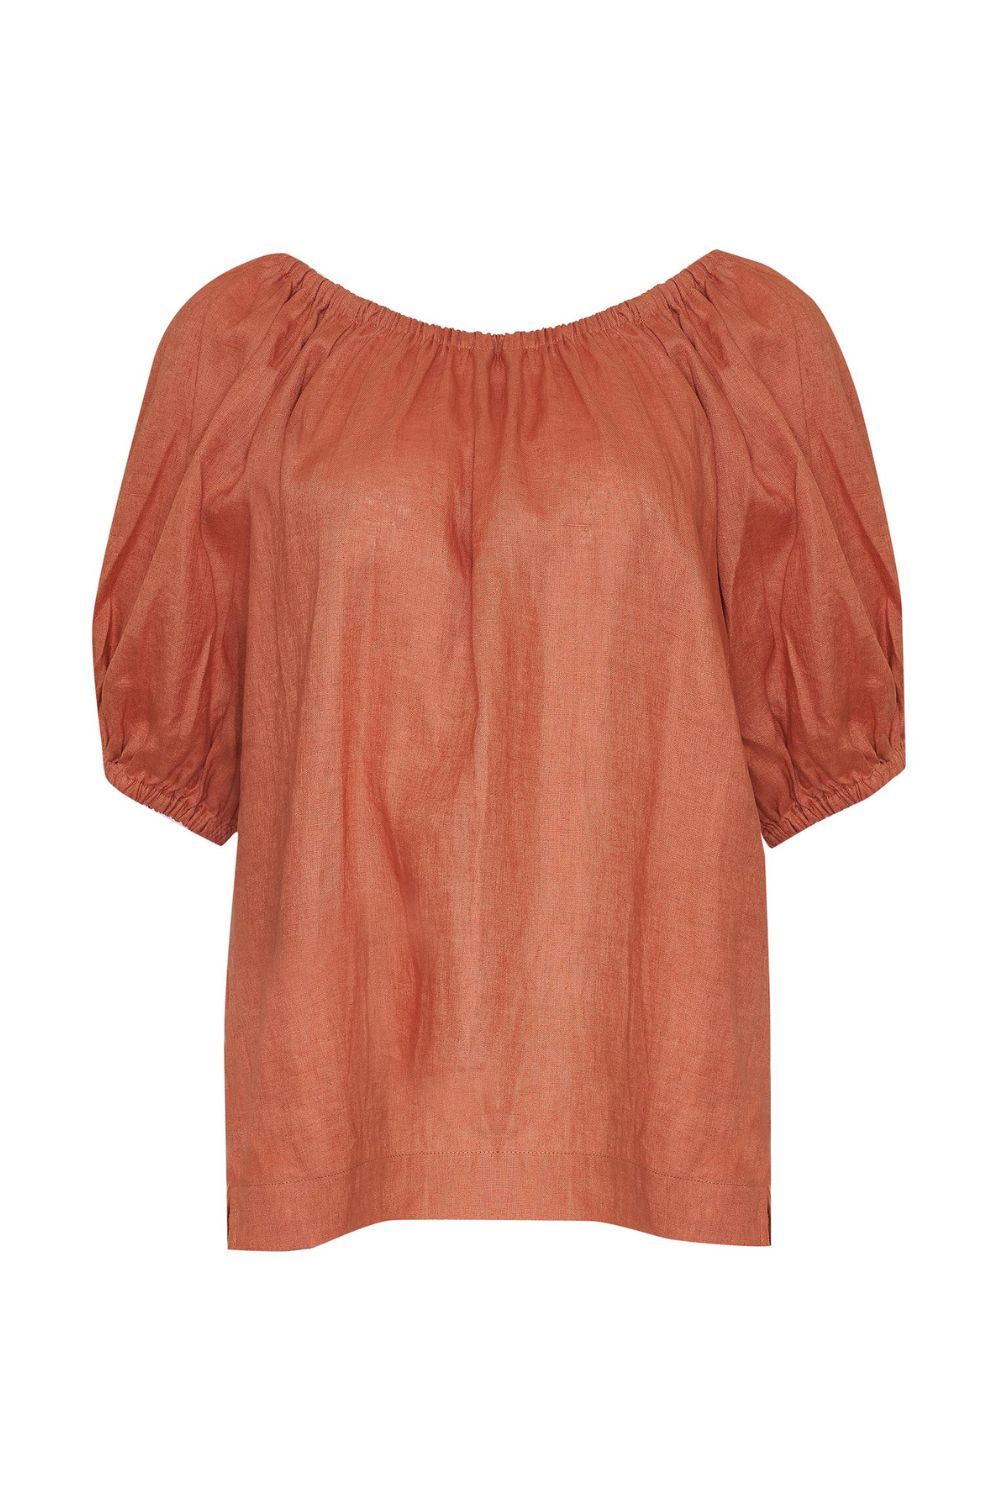 ginger, top, off-the-shoulder, mid-length sleeve, small side splits, elasticated sleeve cuff, tie at back, product image